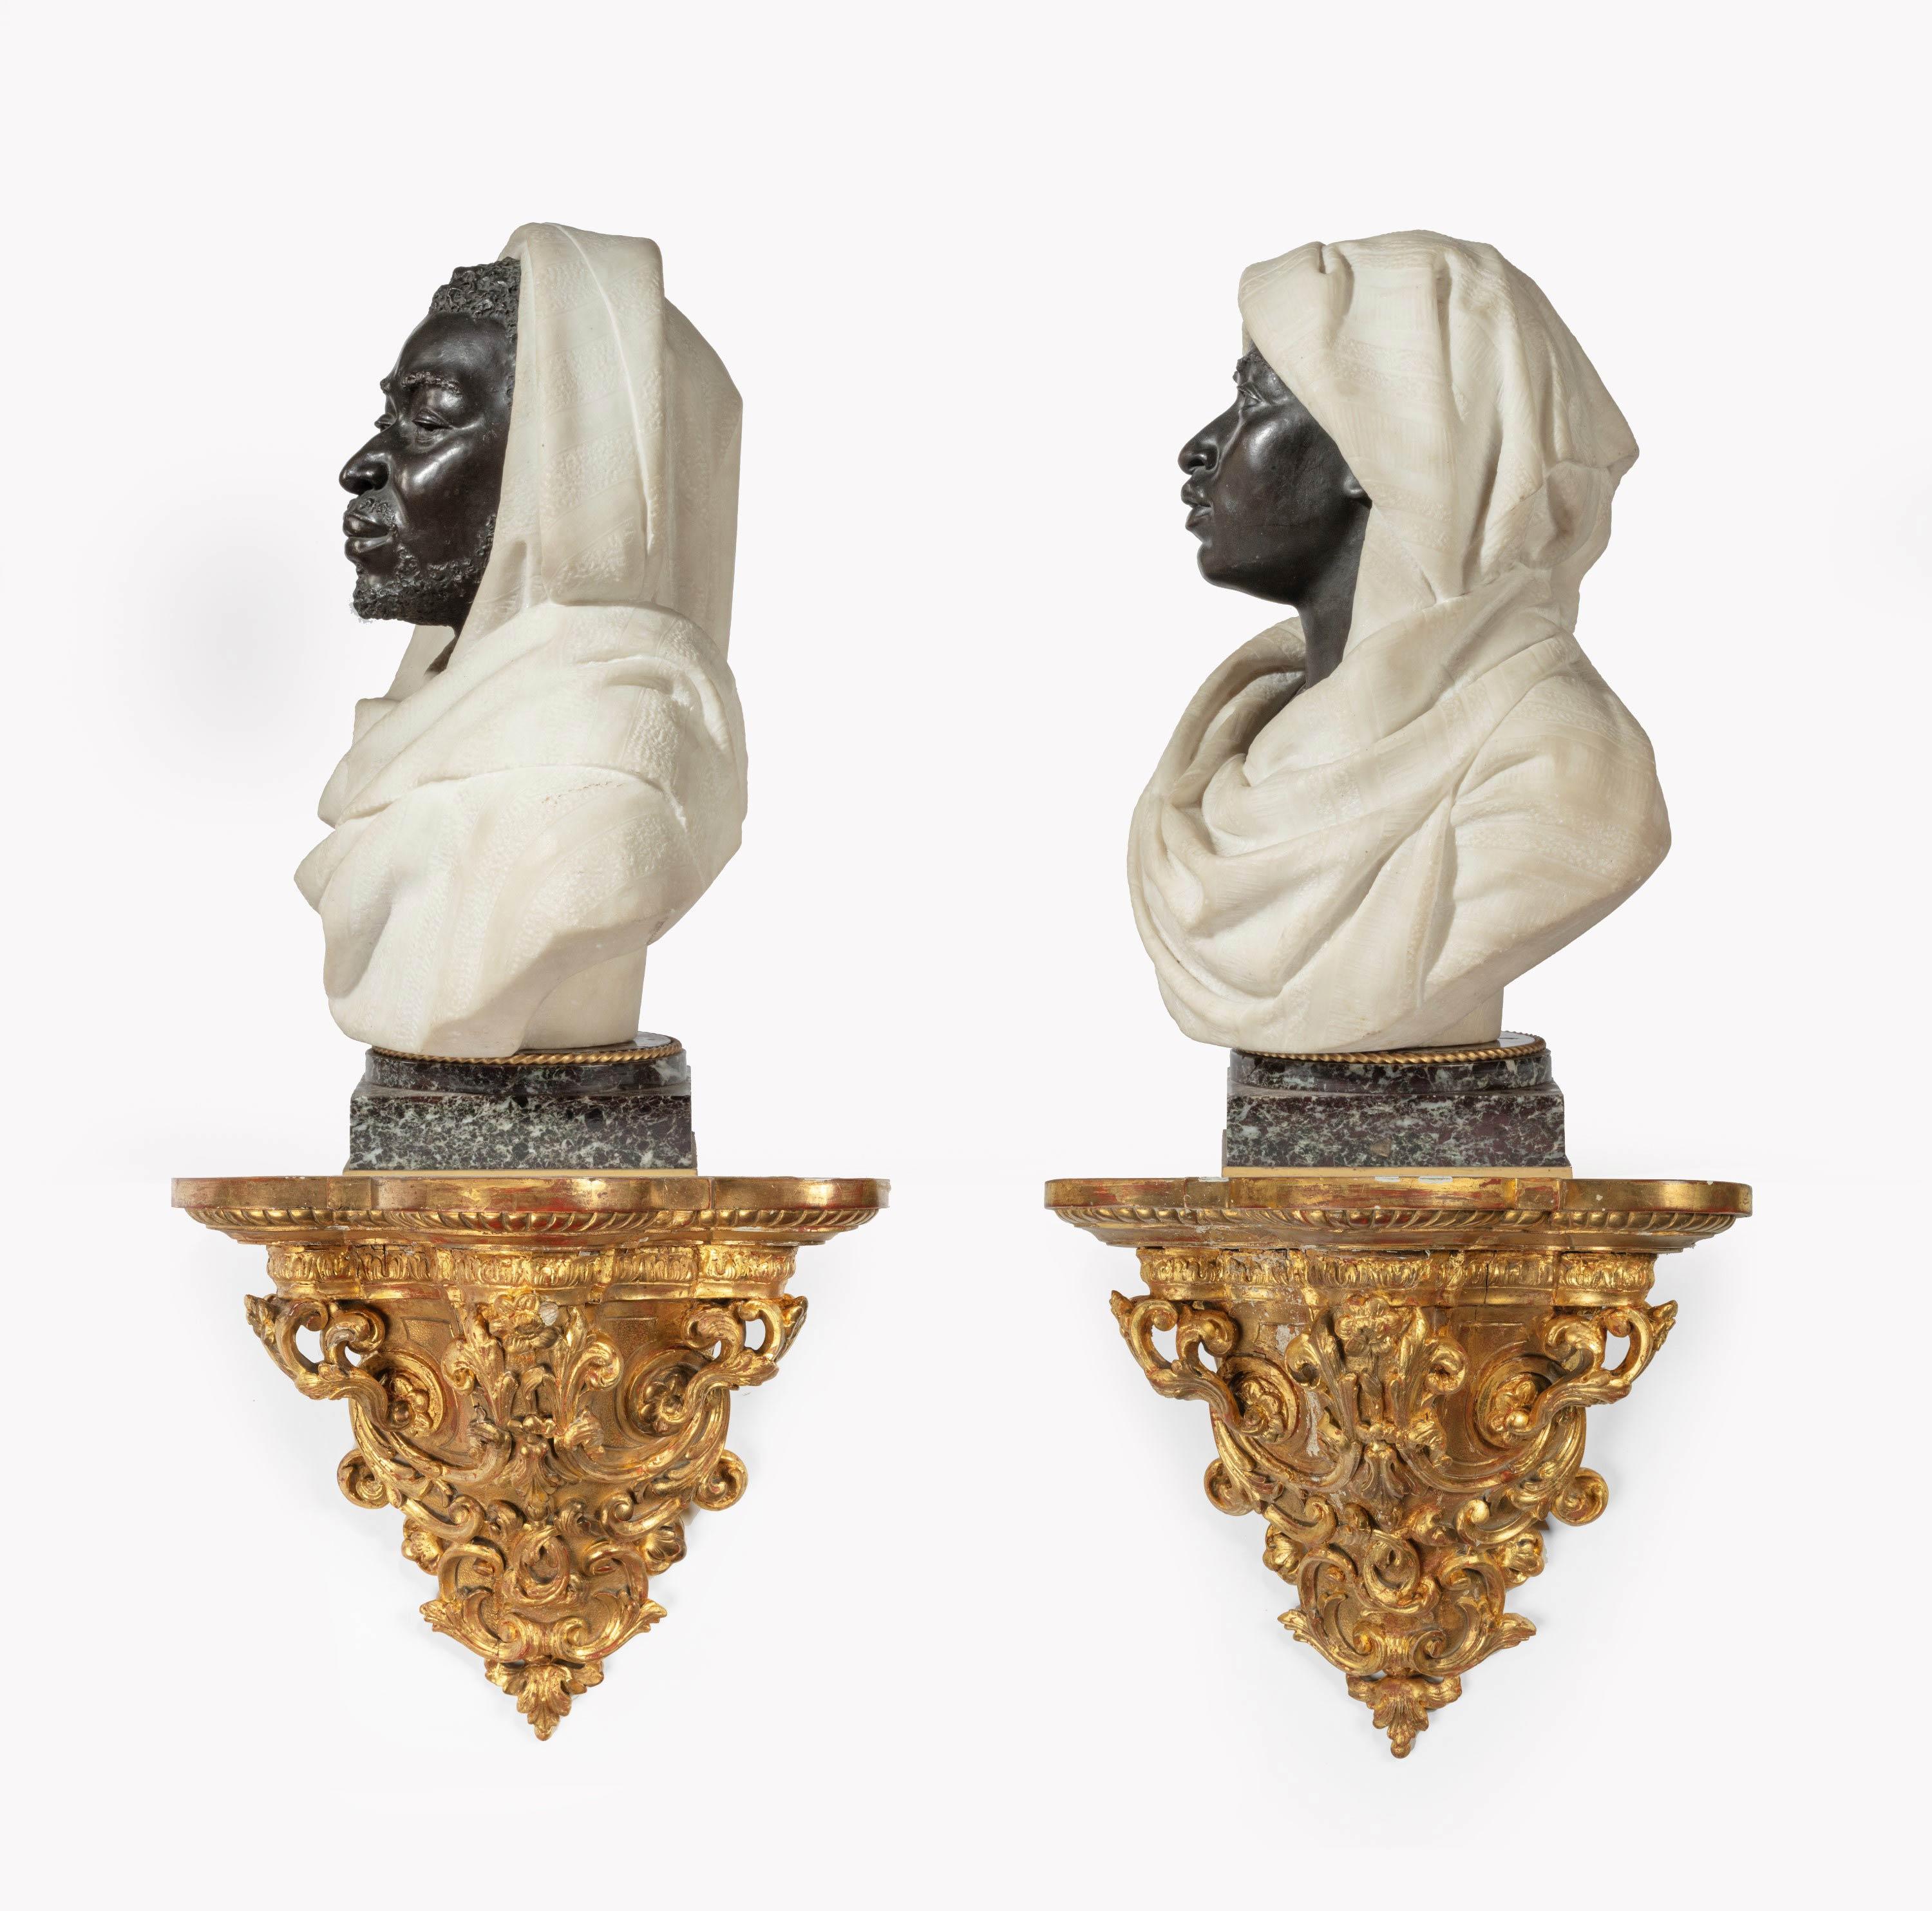 Charles Caccia and Henry Dasson respectively 1883 and 1885. A quite exceptional pair of Carrara marble and bronze figures of Nubian male and female figures. Both signed, the bases and socle by Dasson. From the distinguished collection of Sir Ralph